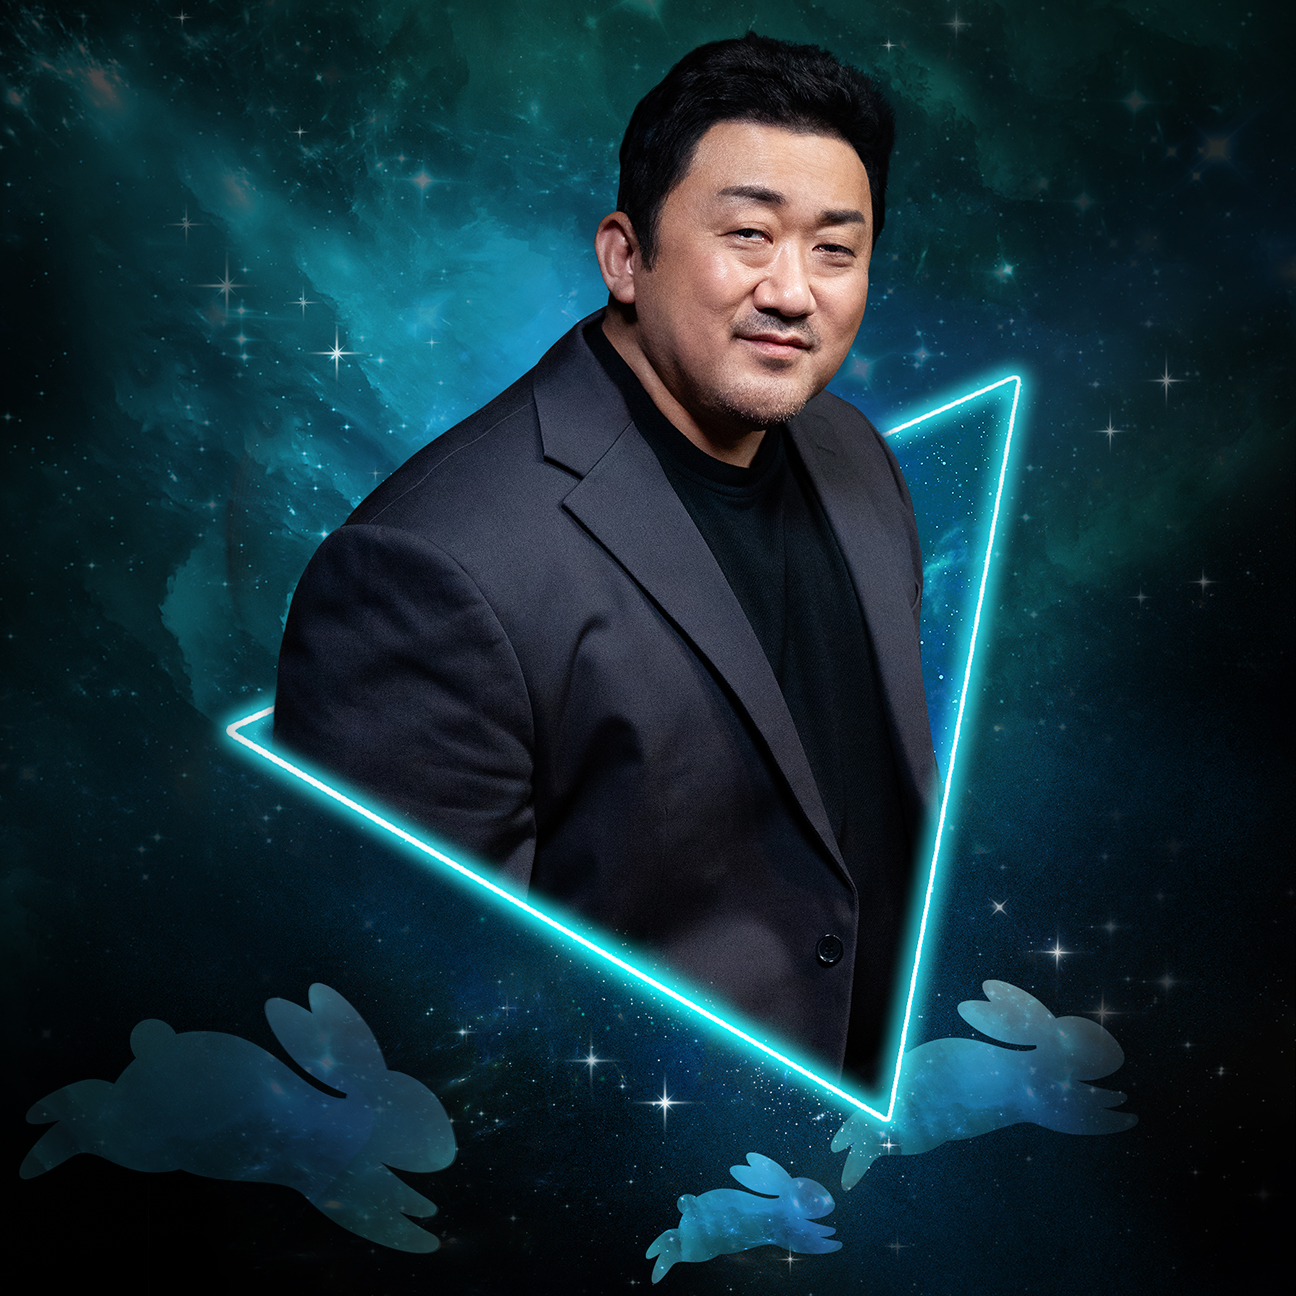 Ma Dong-seok, the Actor from the 2023 Visionary of CJ ENM.